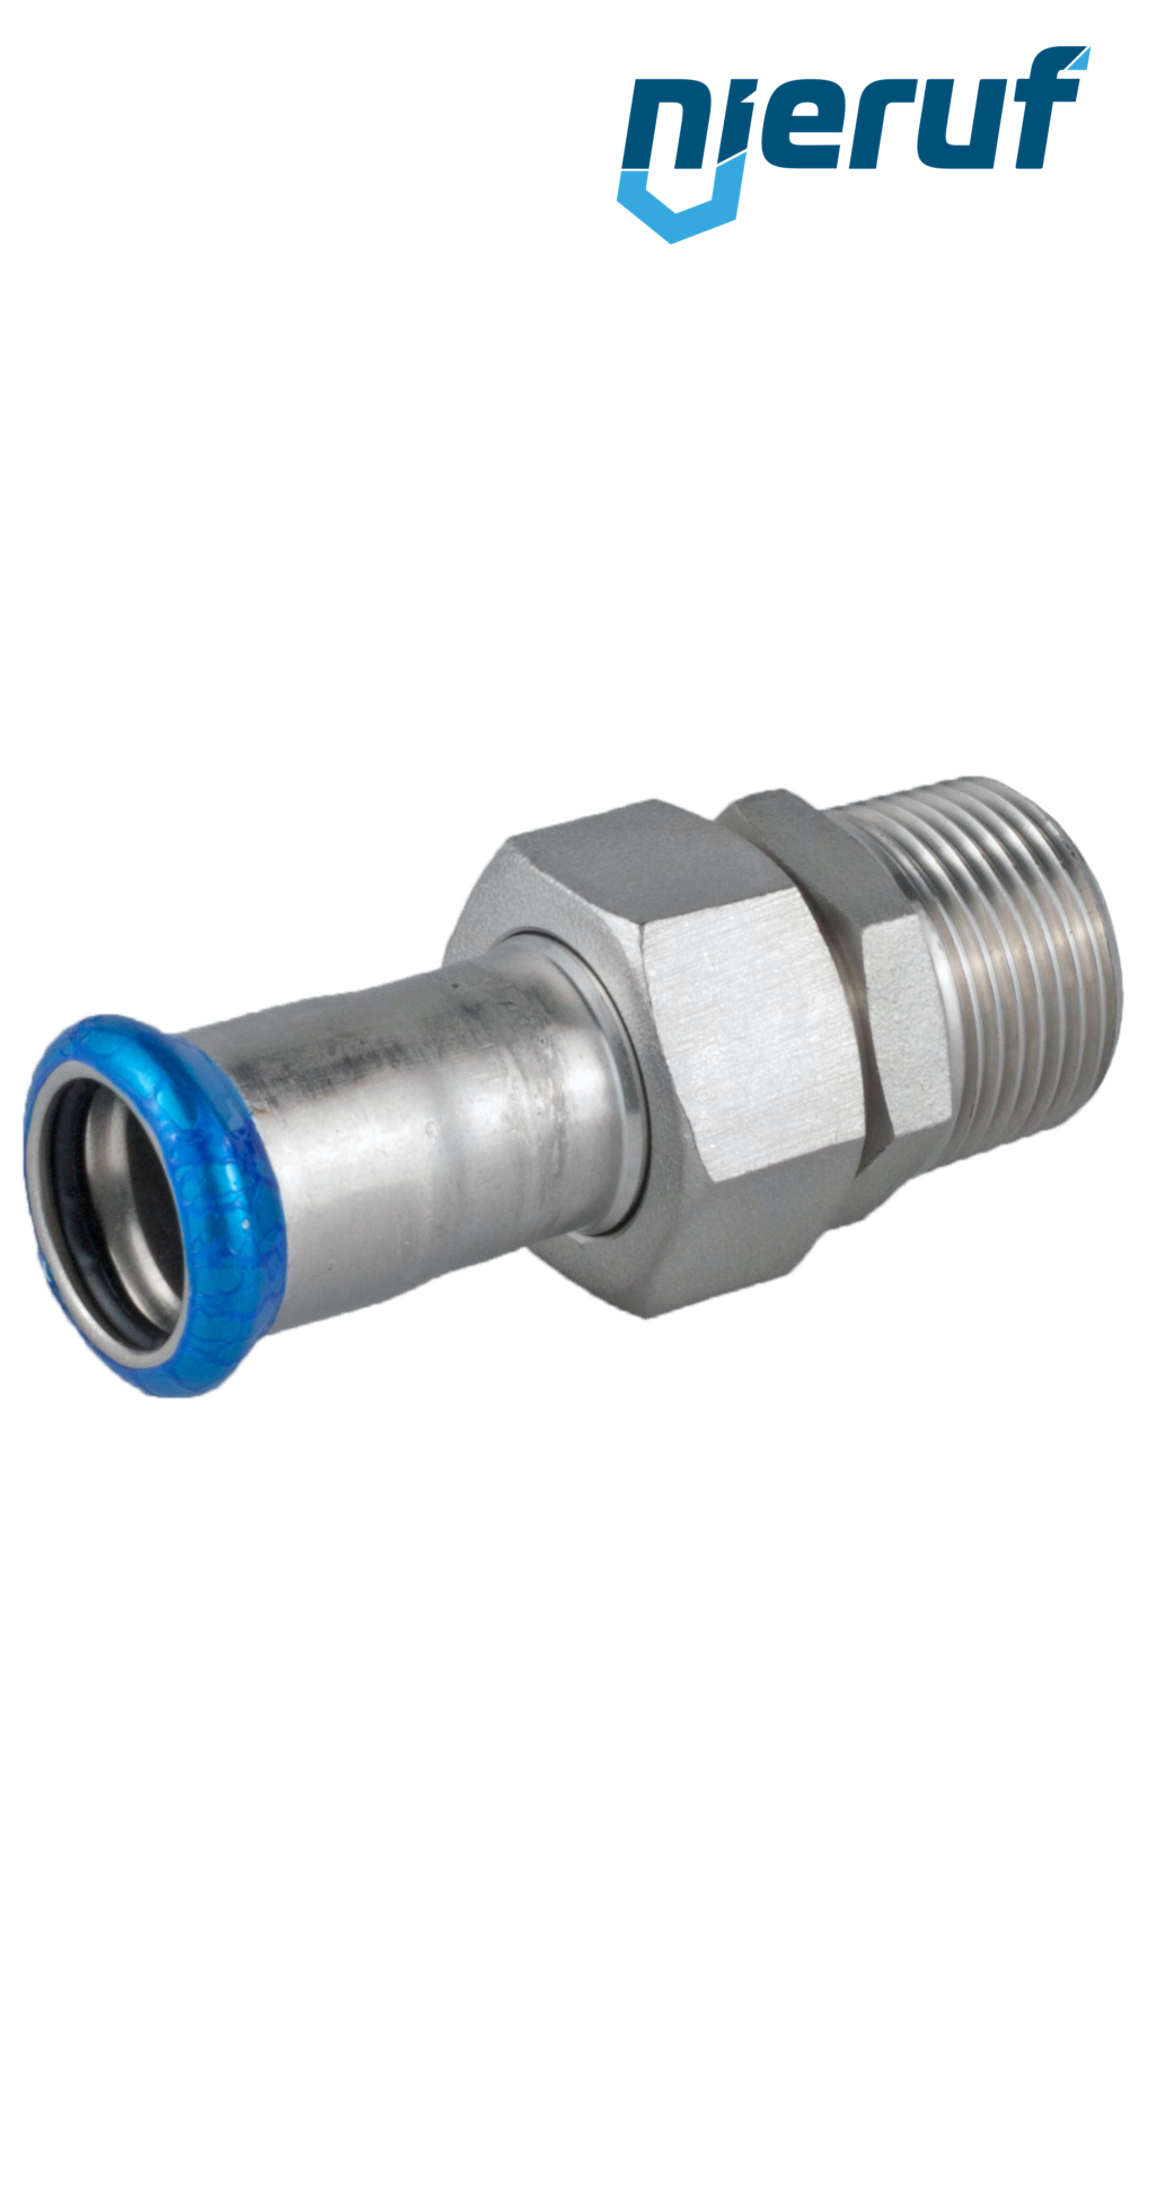 Union Coupling Pressfitting F DN25 - 28,0 mm male thread 1" inch stainless steel